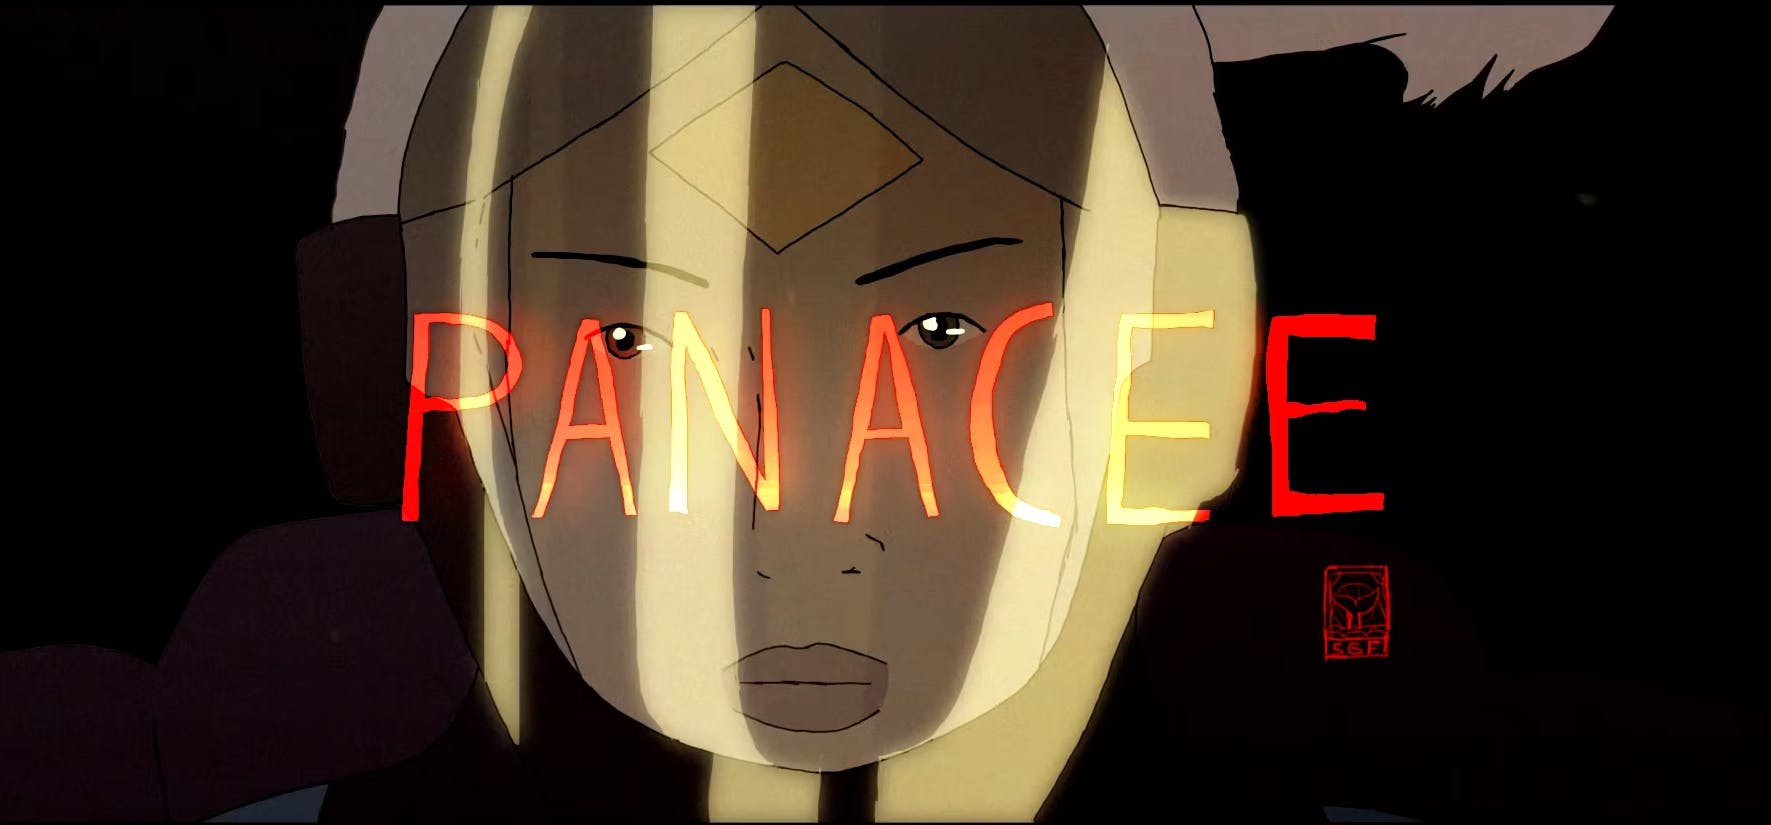 Title card for Jules Boulain-Adenis's Panacee. The word "PANACEE" is overlaying an illustration of a feminine face, that has a diamond on their forehead, dark skin, and wearing a helmet.